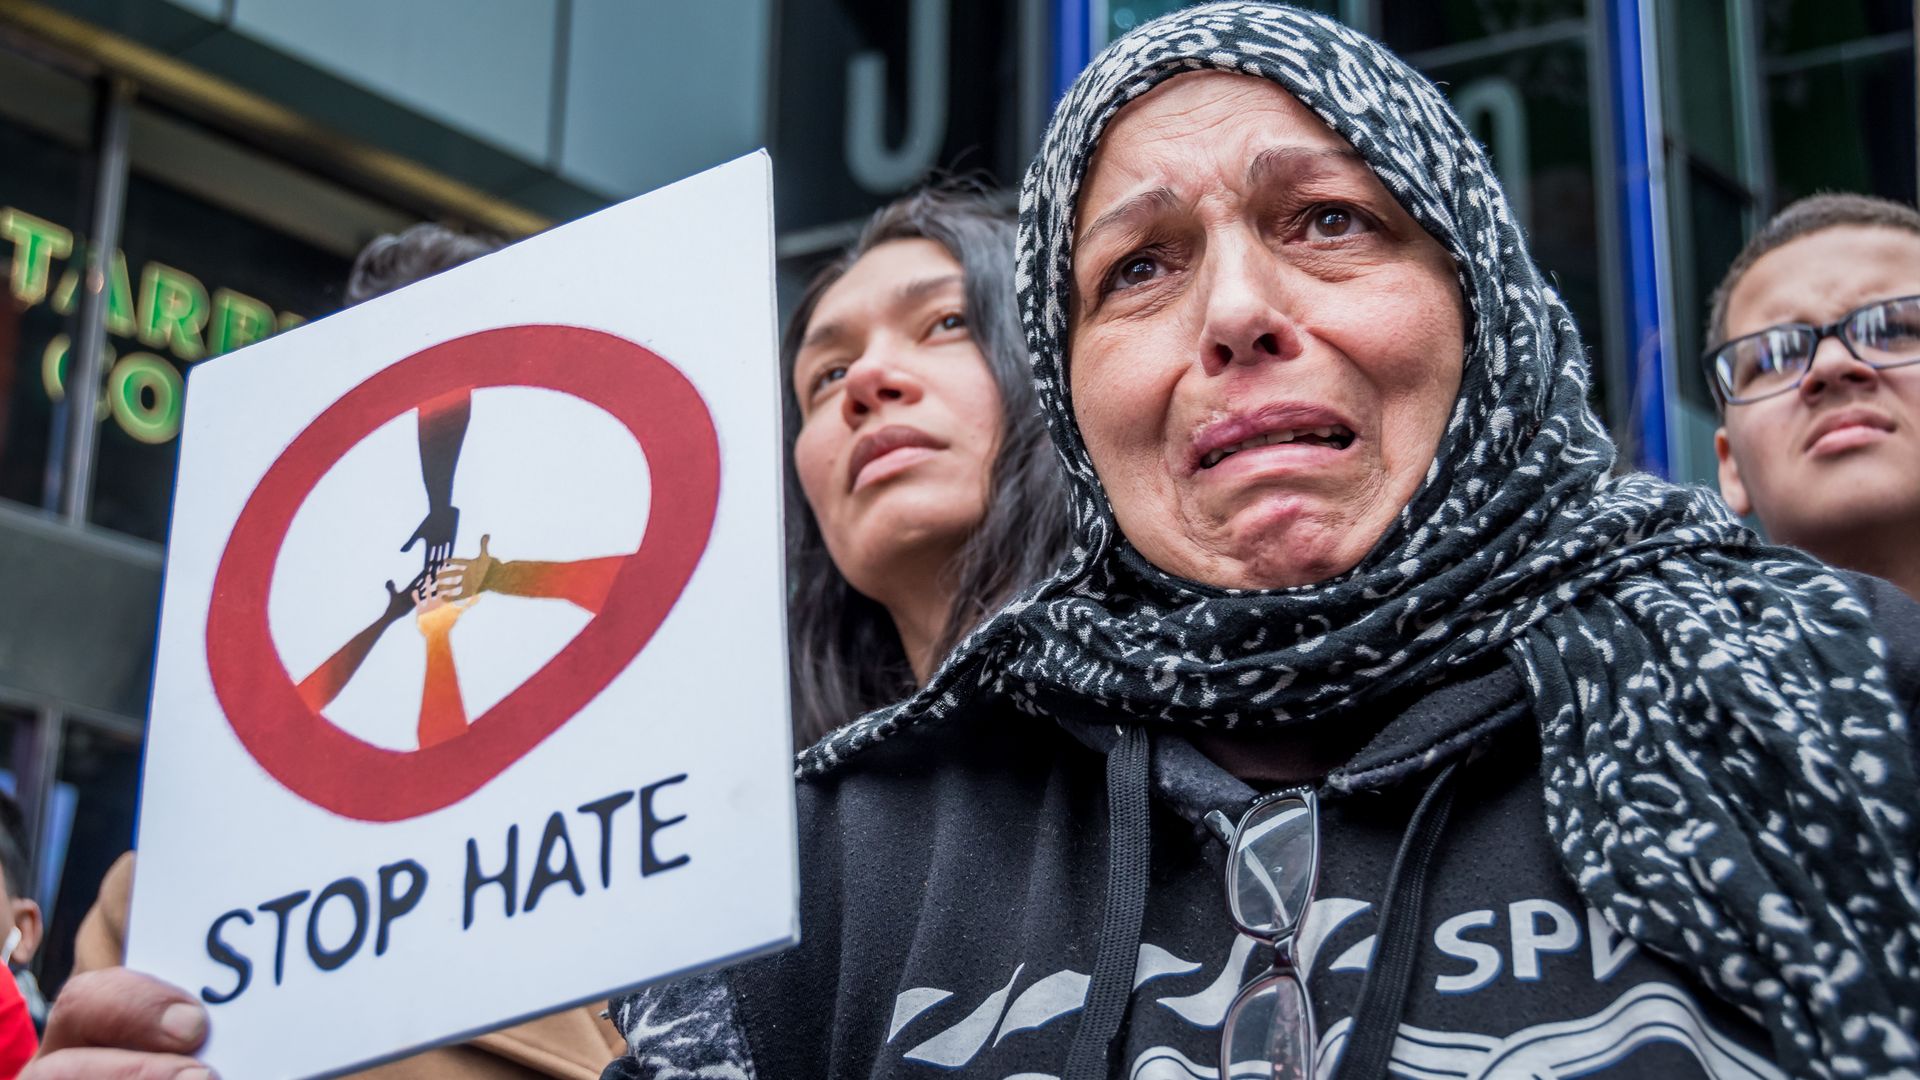 Muslim leaders and allies across New York City held a rally and march against Islamophobia.